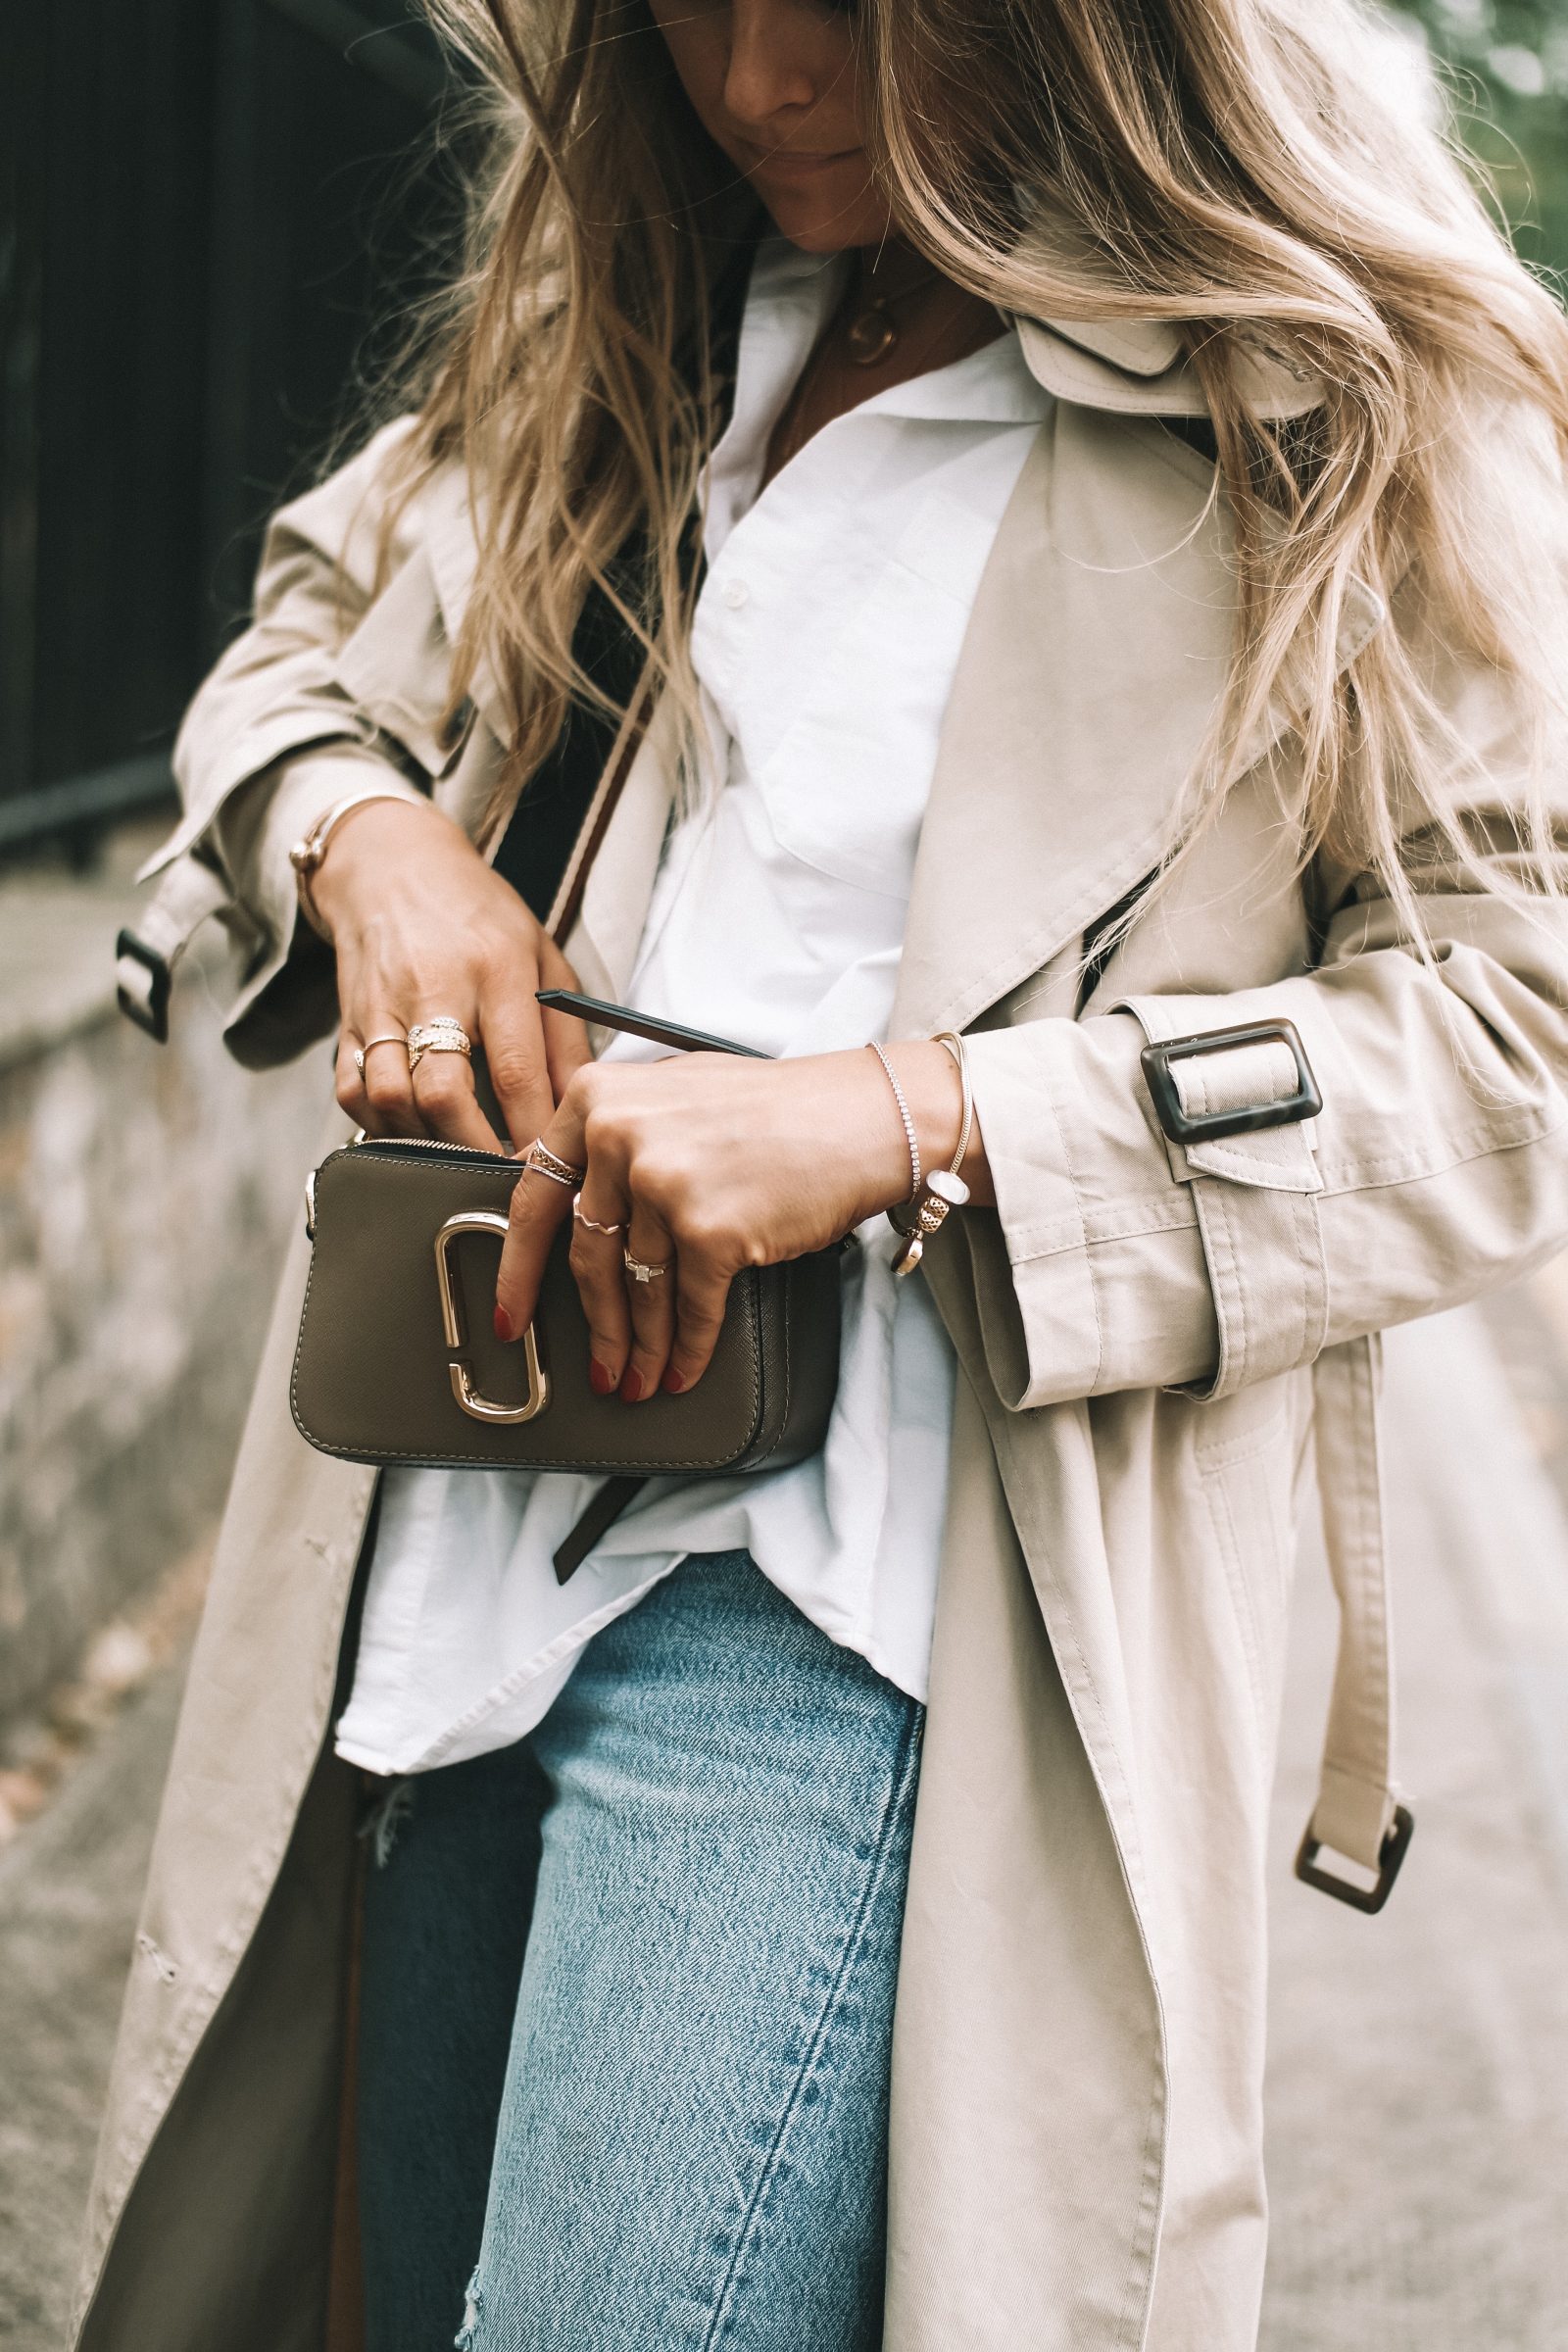 LFW Street Style - Classic Trench Coat